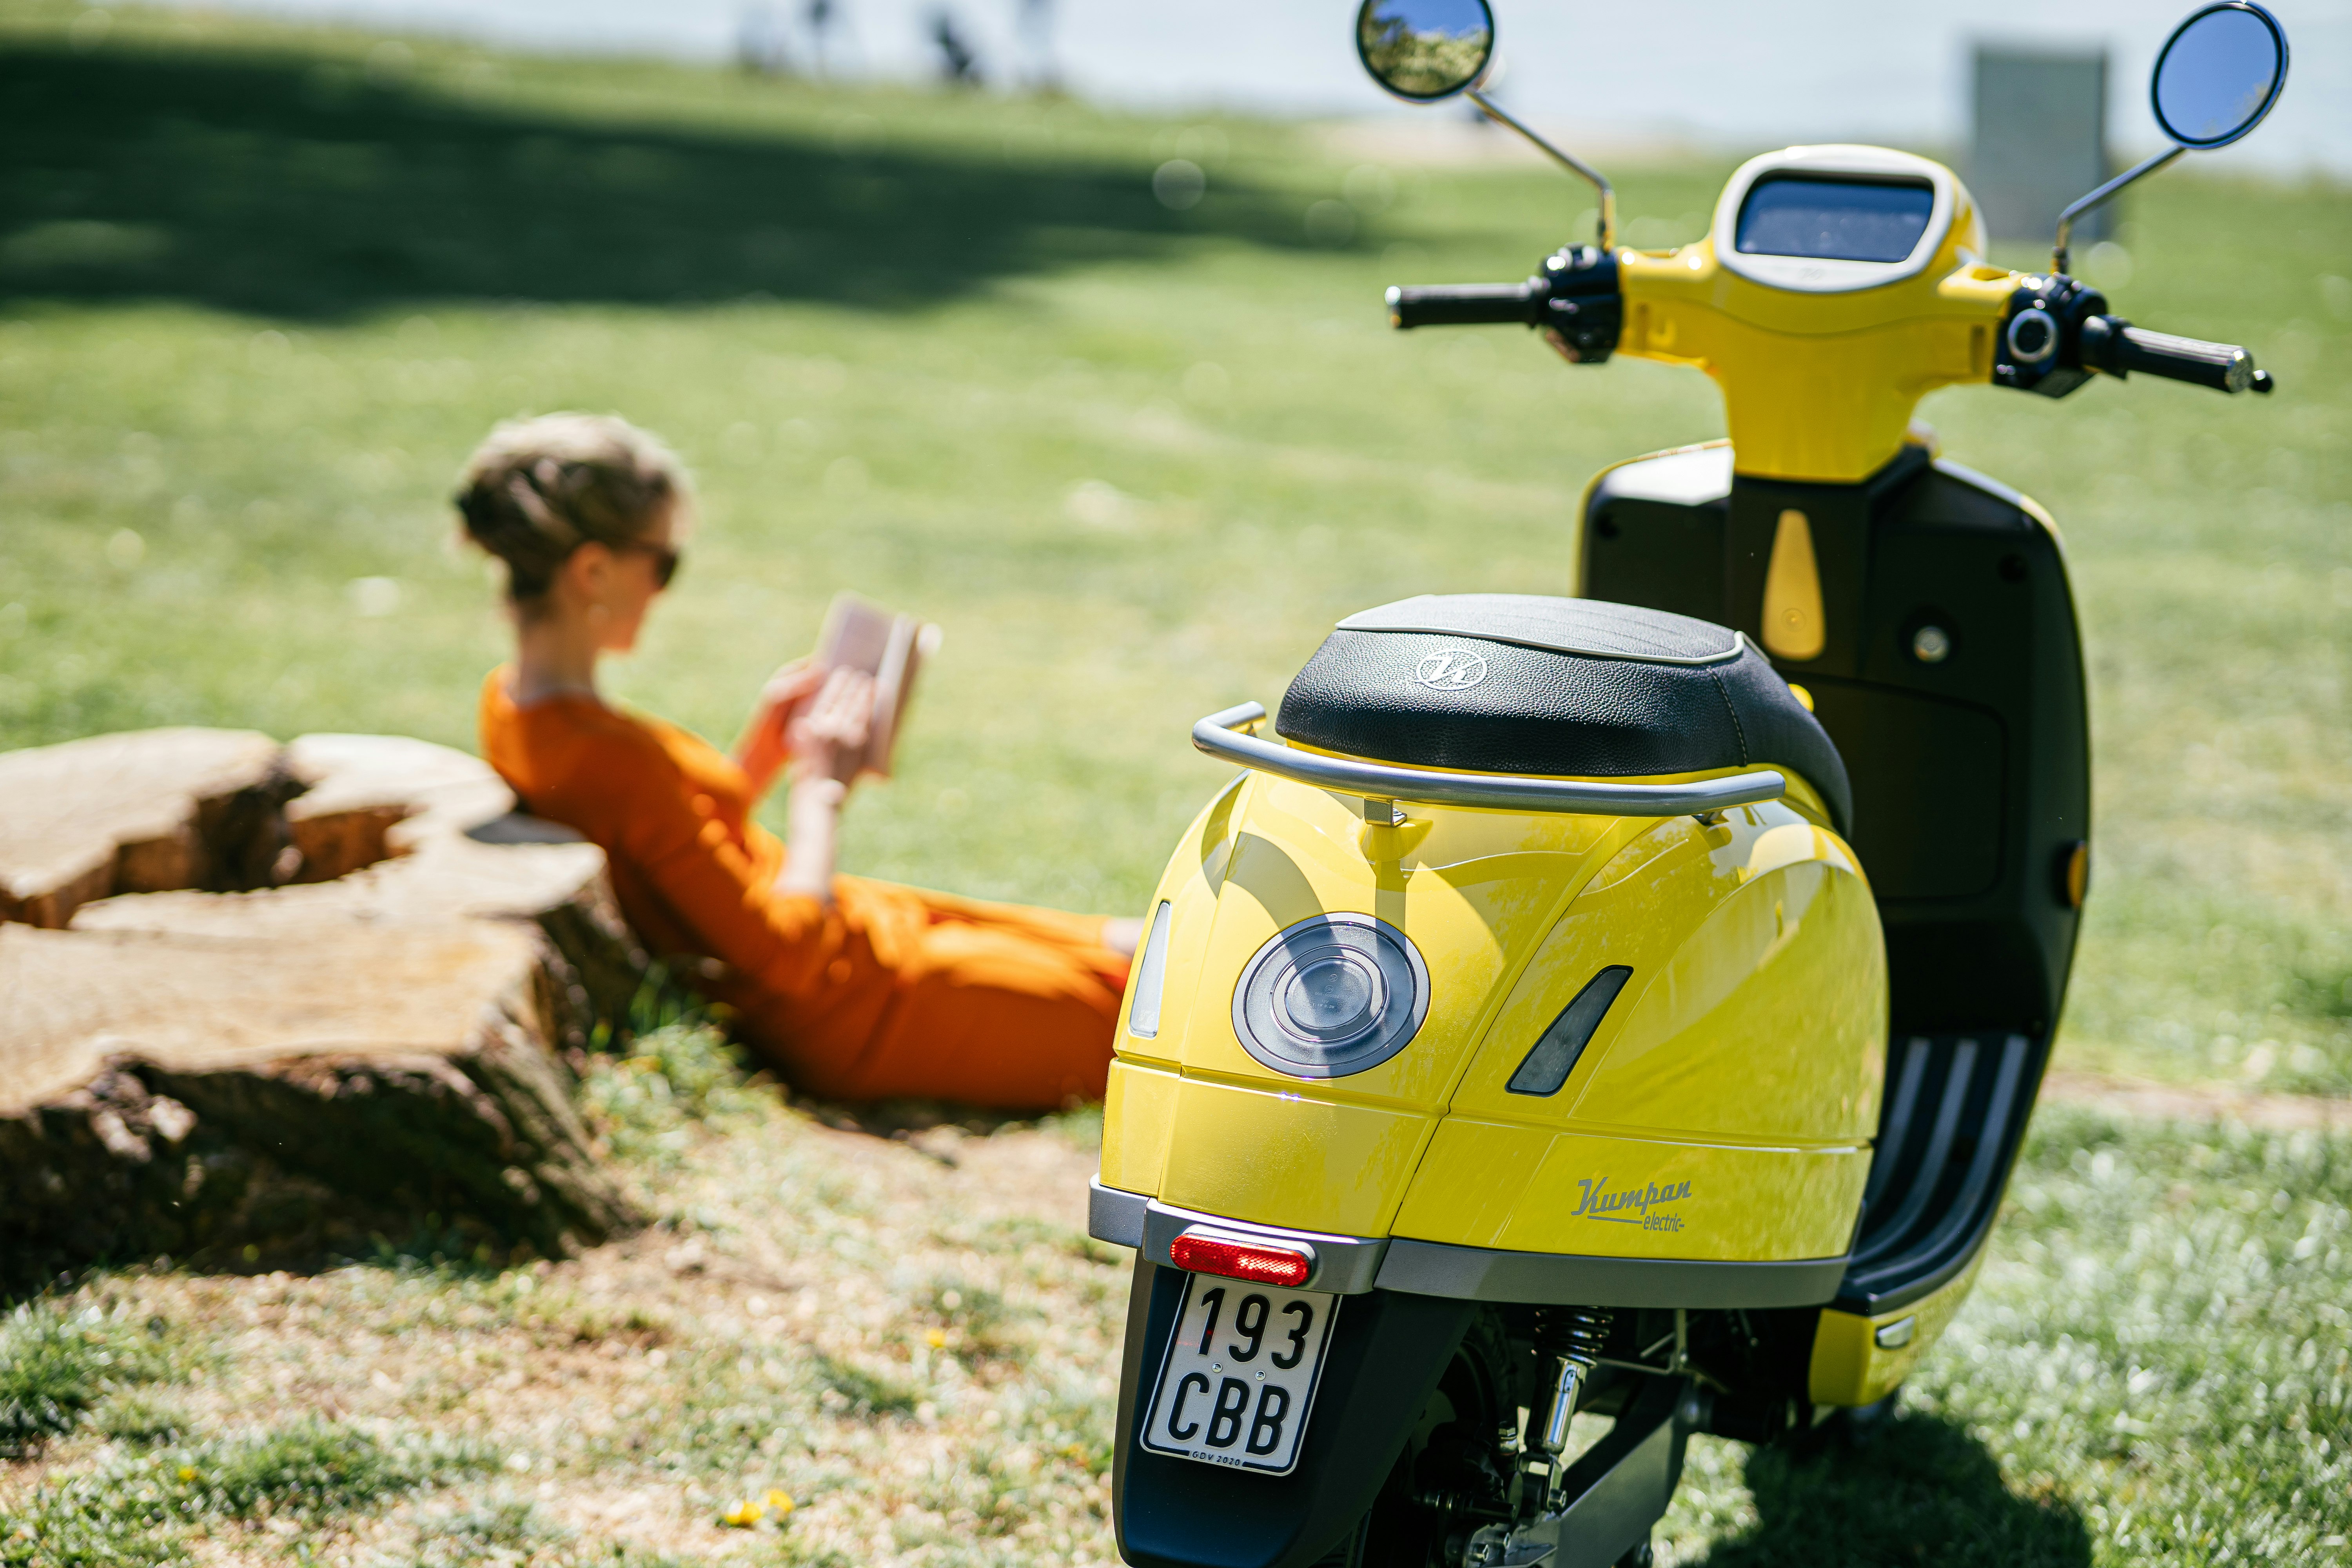 Just chillin' with her e-Scooter. 💚